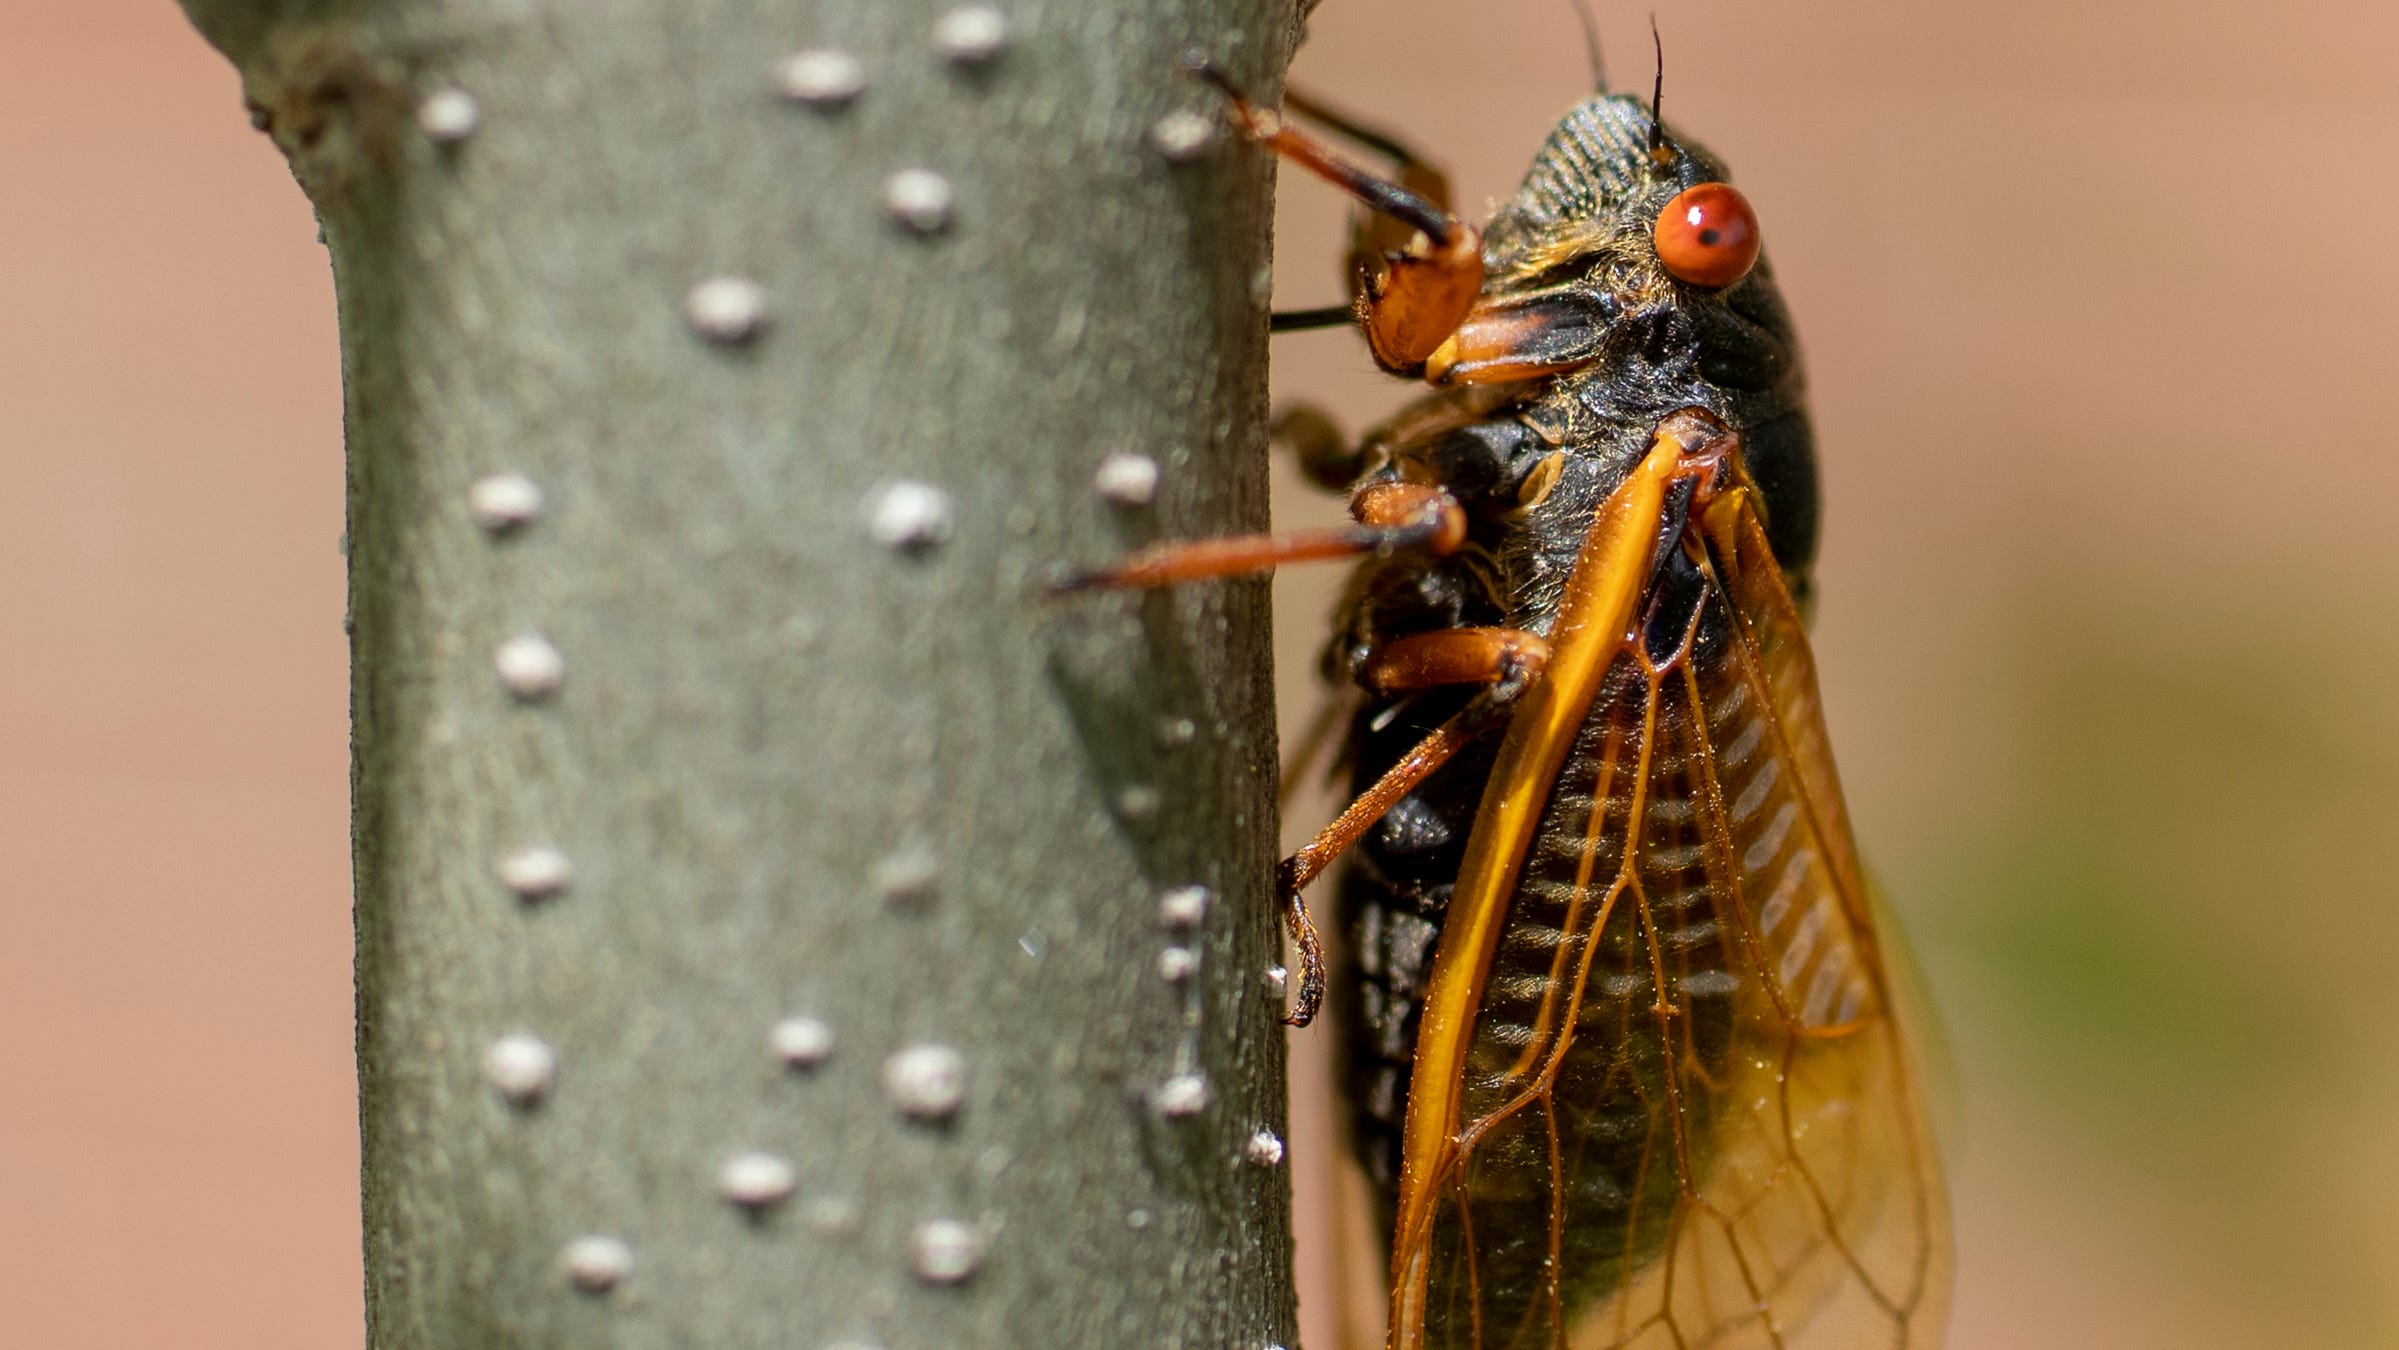 The cicadas are here Brood X emerges in Central Indiana